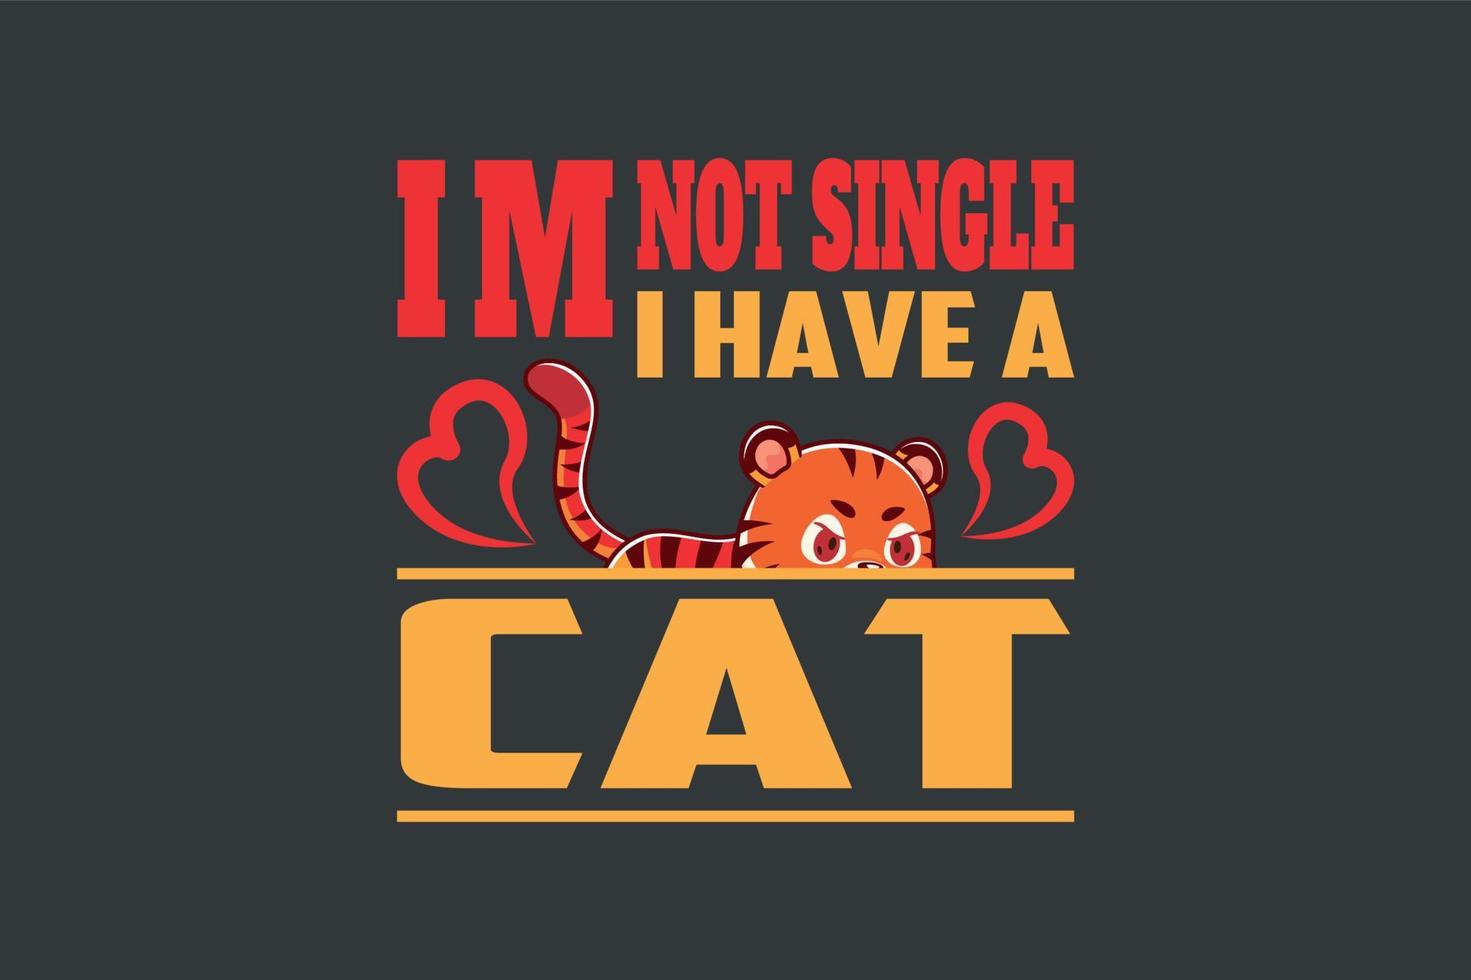 I am not single I have a cat, single-day t-shirt design vector